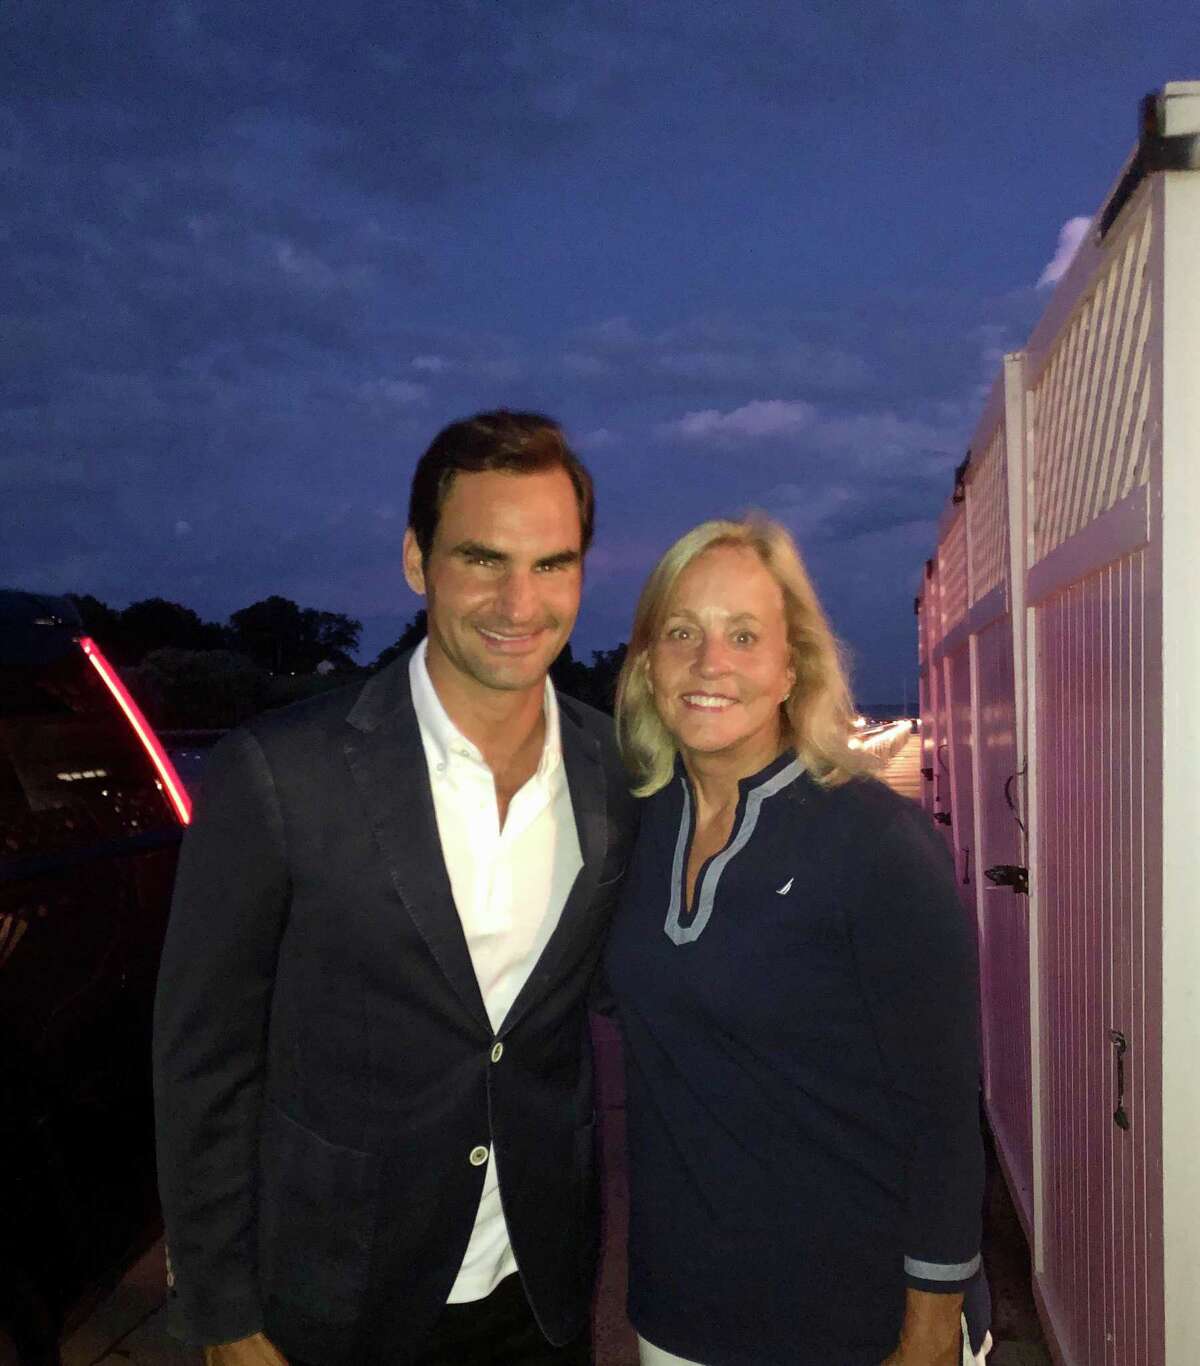 Tennis champion Roger Federer at the Belle Haven Club with Greenwich resident Liz Claiborne Smith.